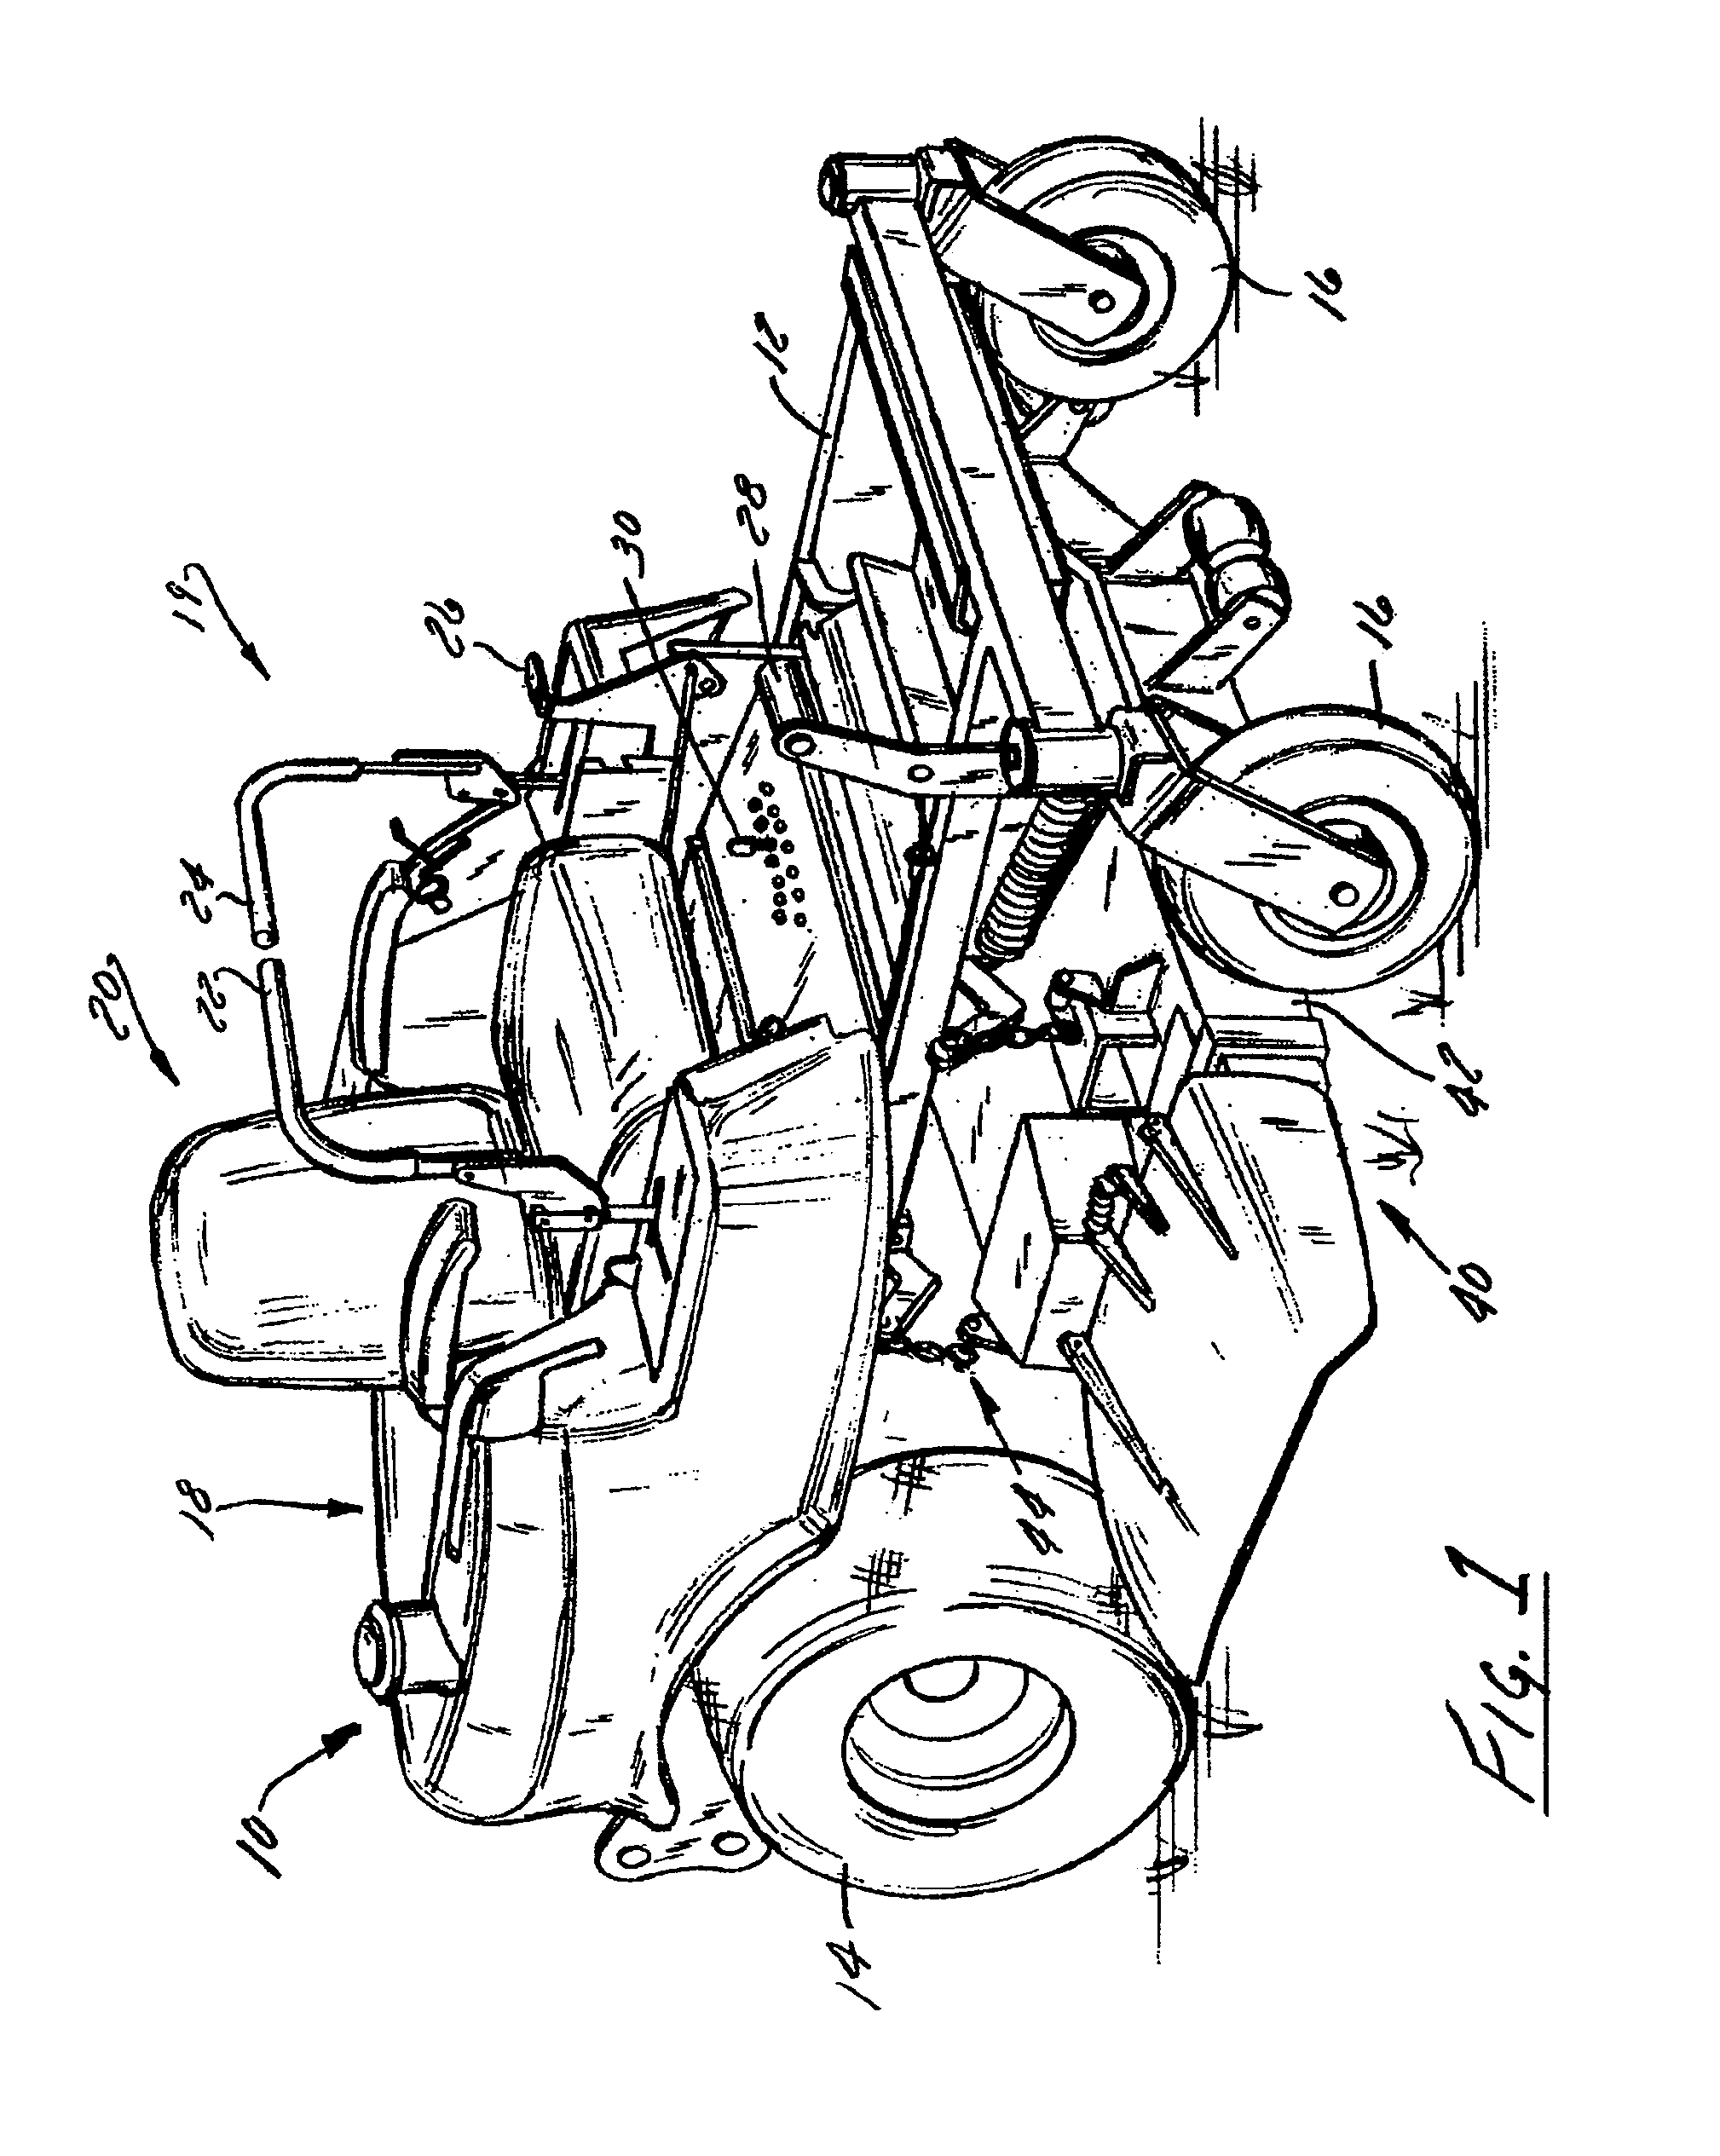 Adjustable pump control linkage for pump driven vehicle